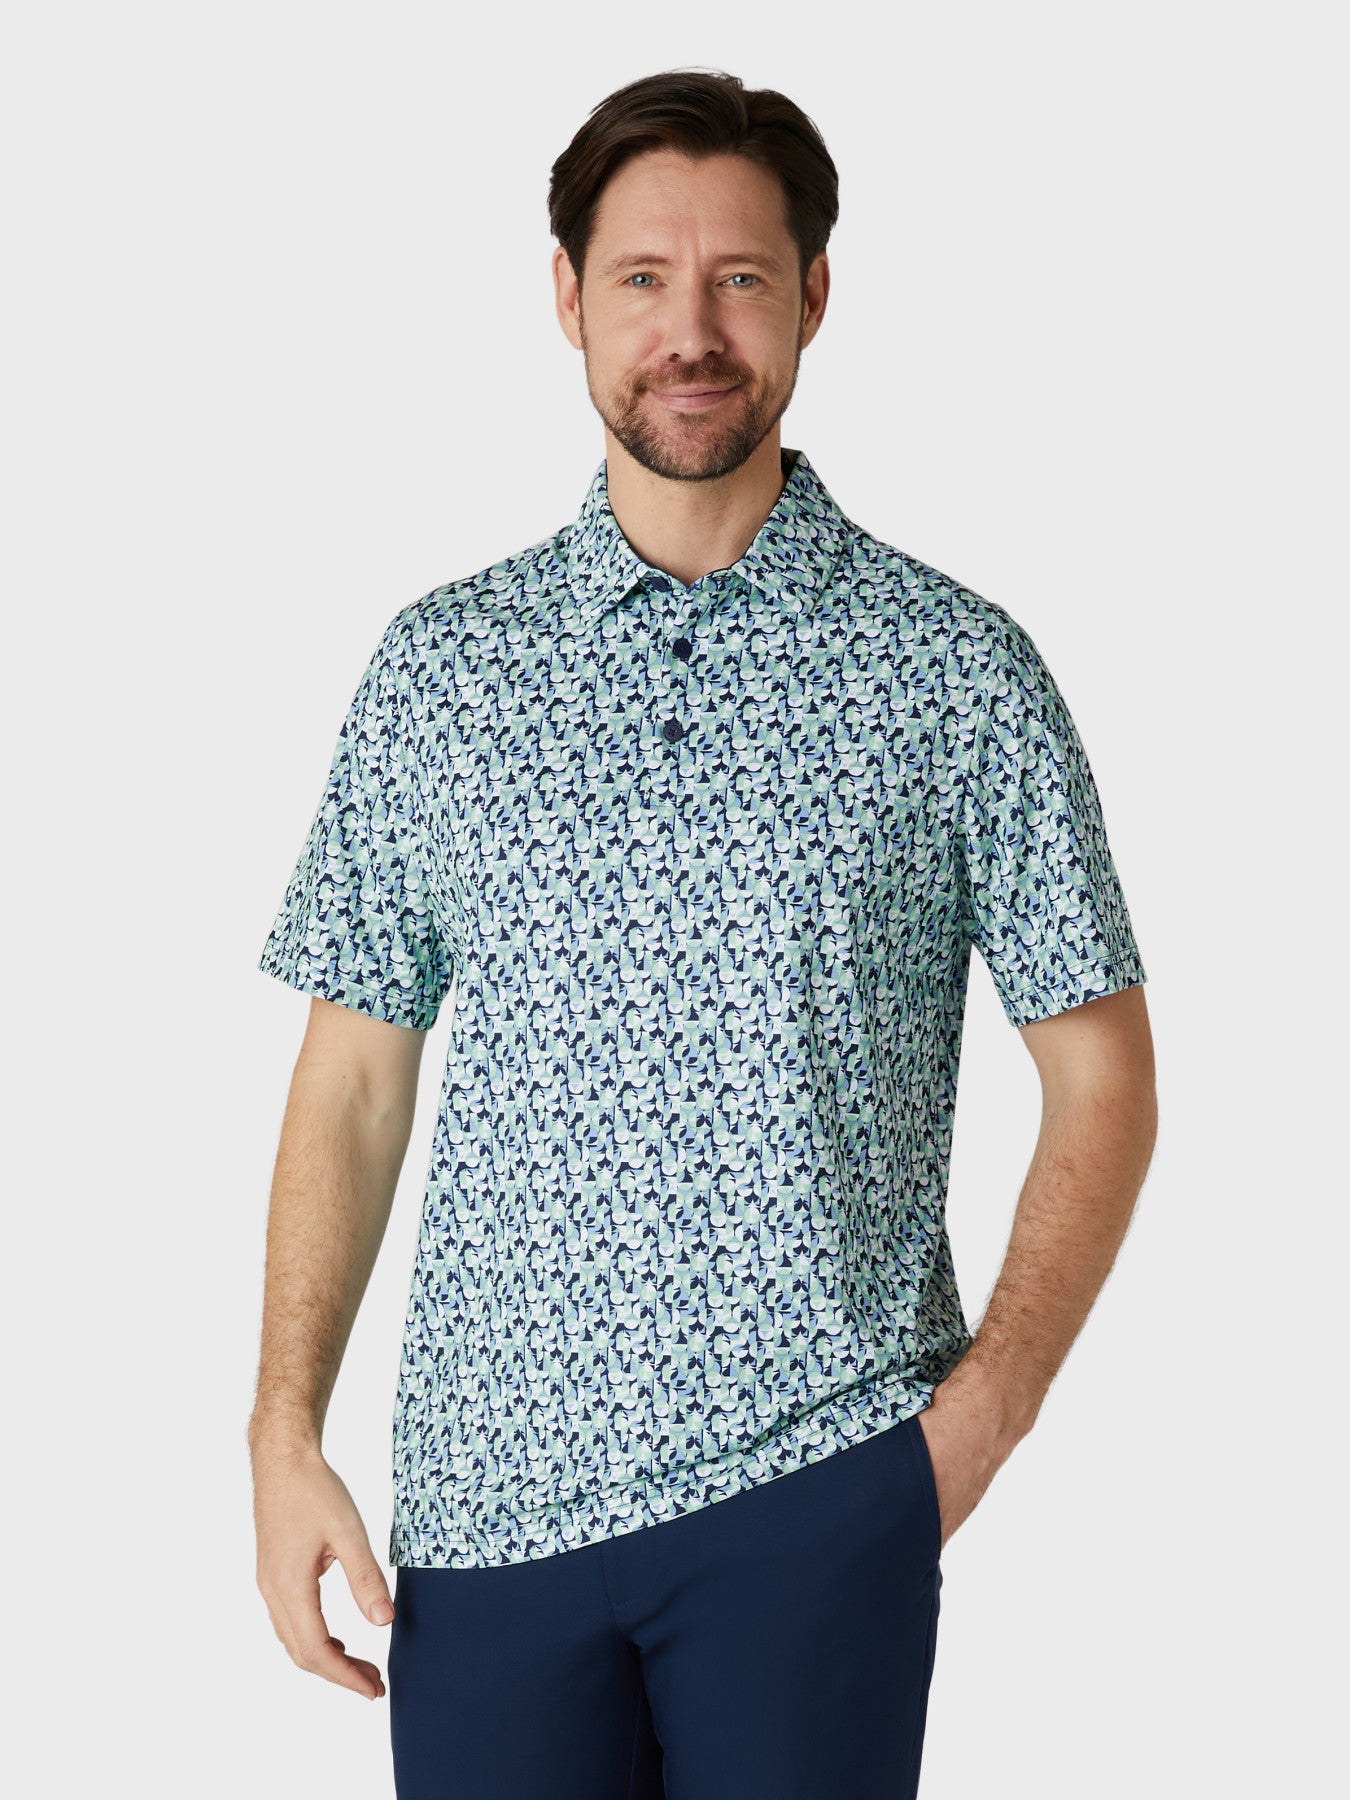 View Short Sleeve All Over Abstract Golf Ball Print Polo Shirt In Peacoat information